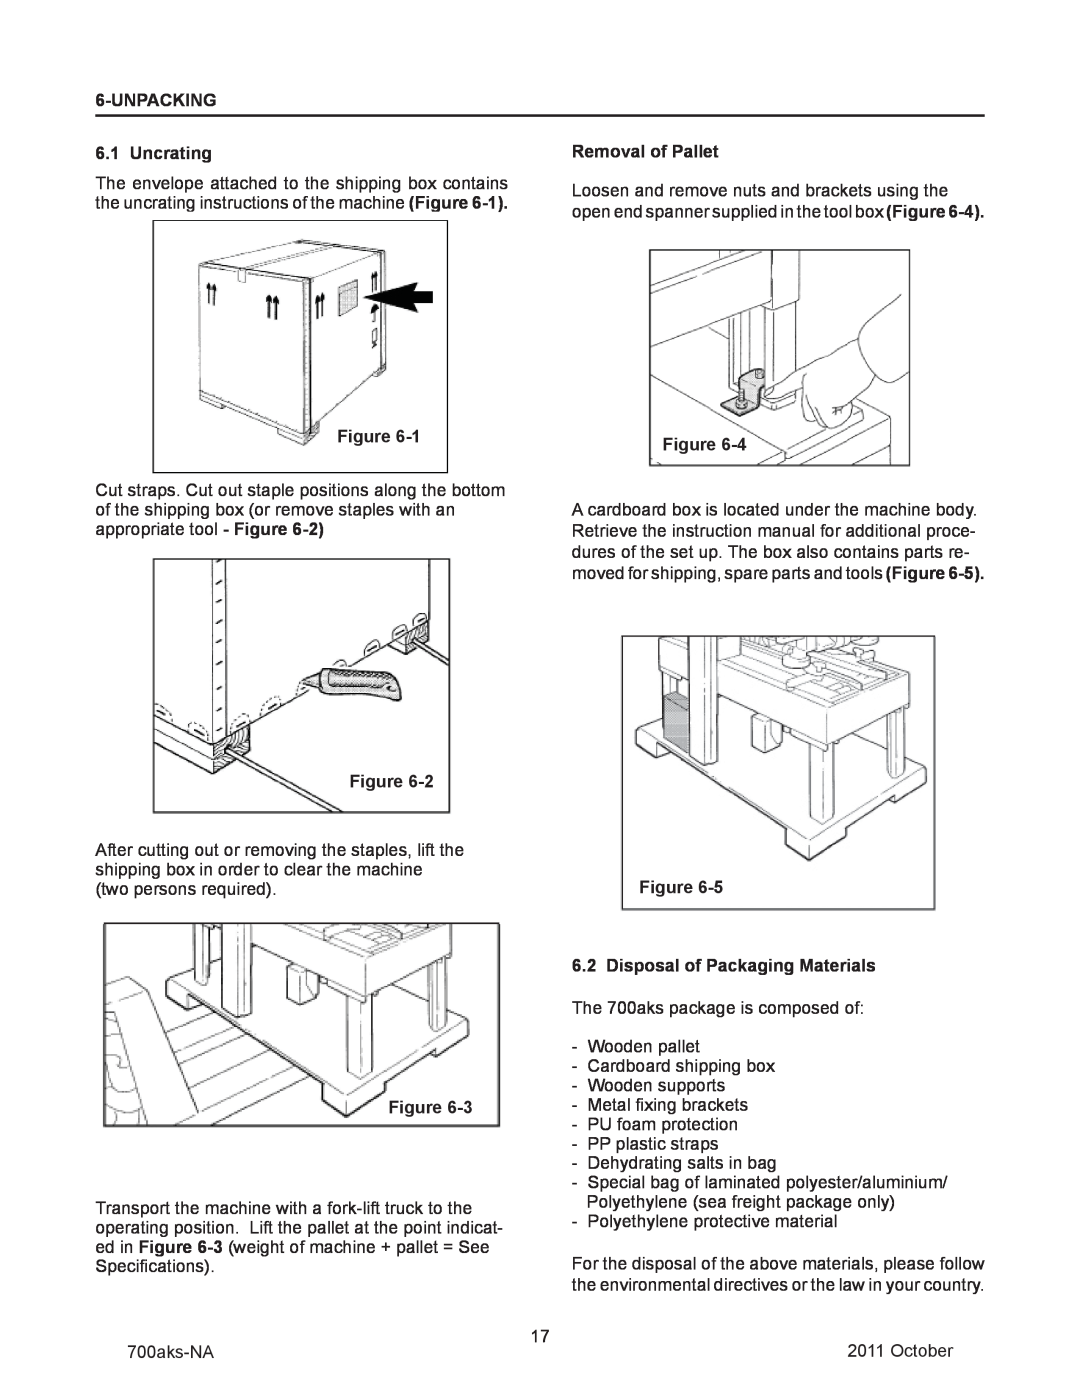 3M 40800 operating instructions Unpacking, Uncrating, Removal of Pallet, Figure, Disposal of Packaging Materials 